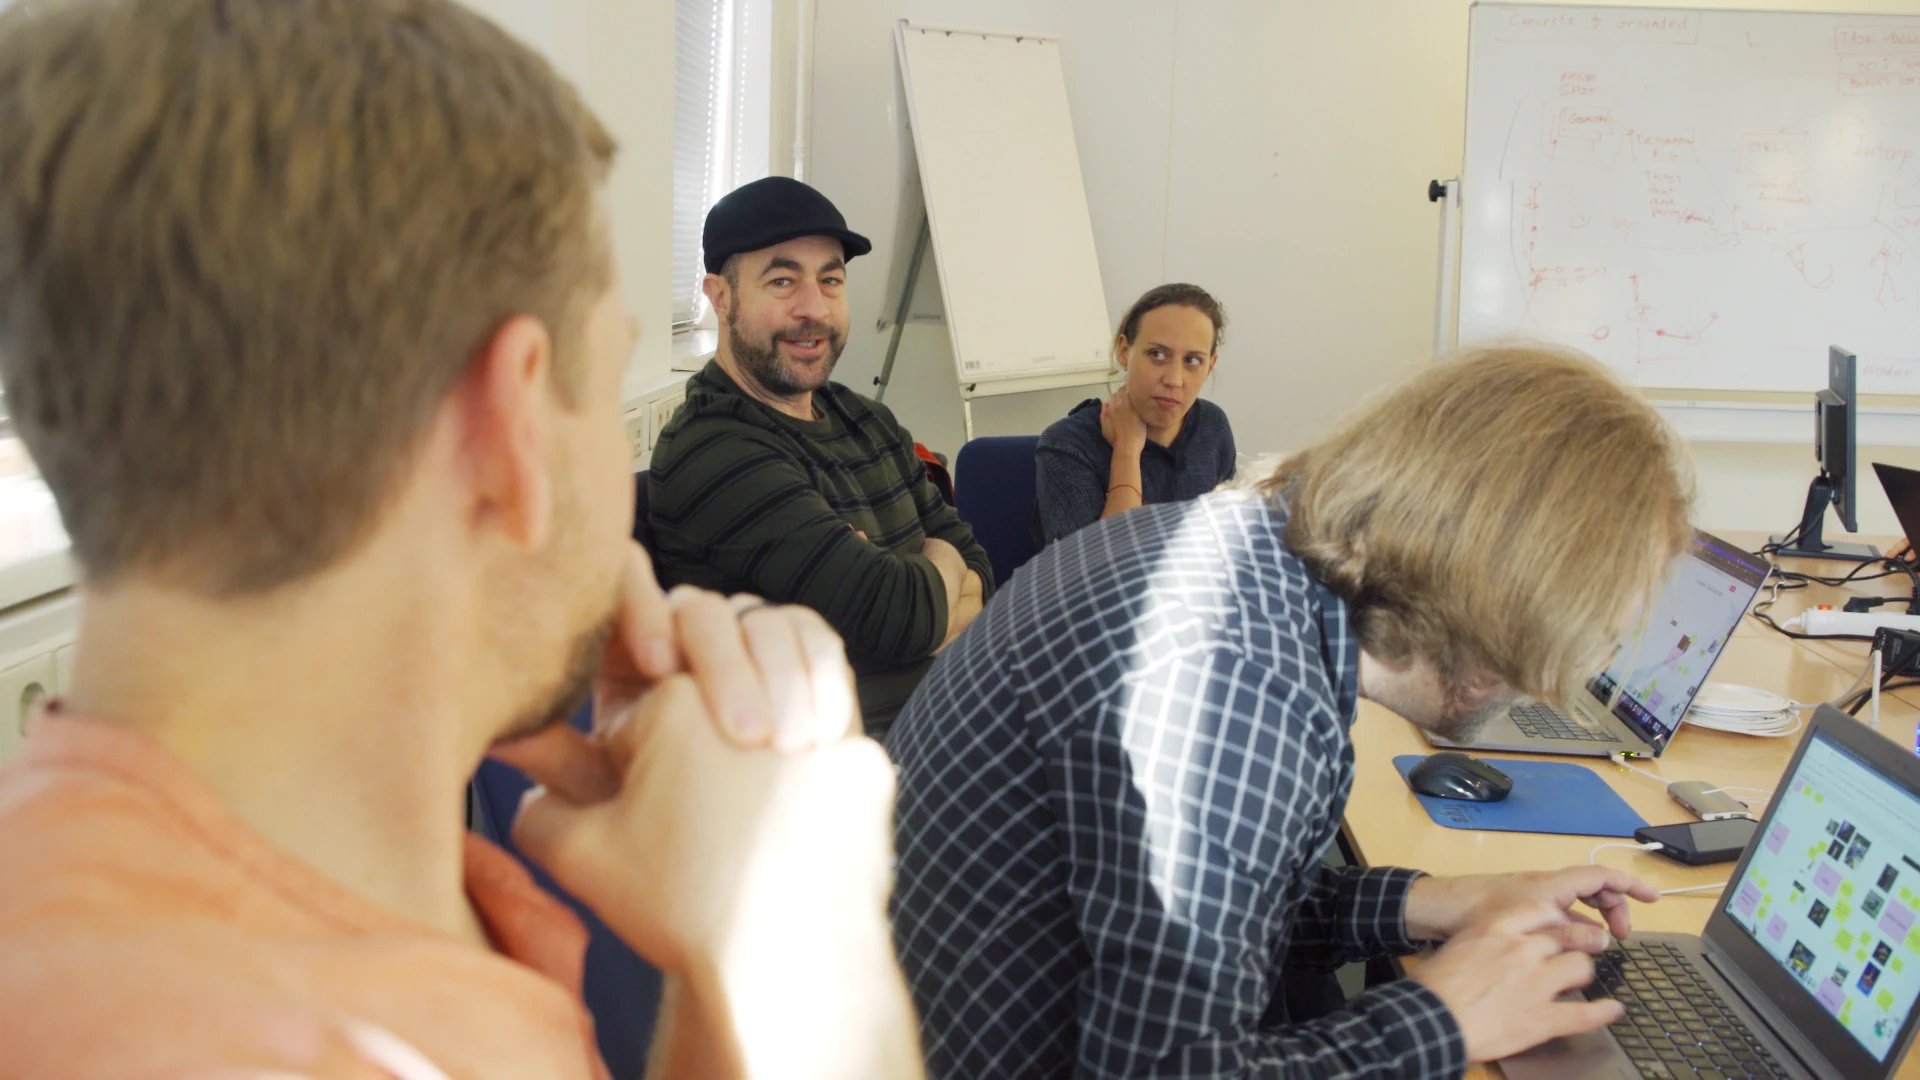 Four members of the Animation & Rigging module discussing ideas during the workshop.